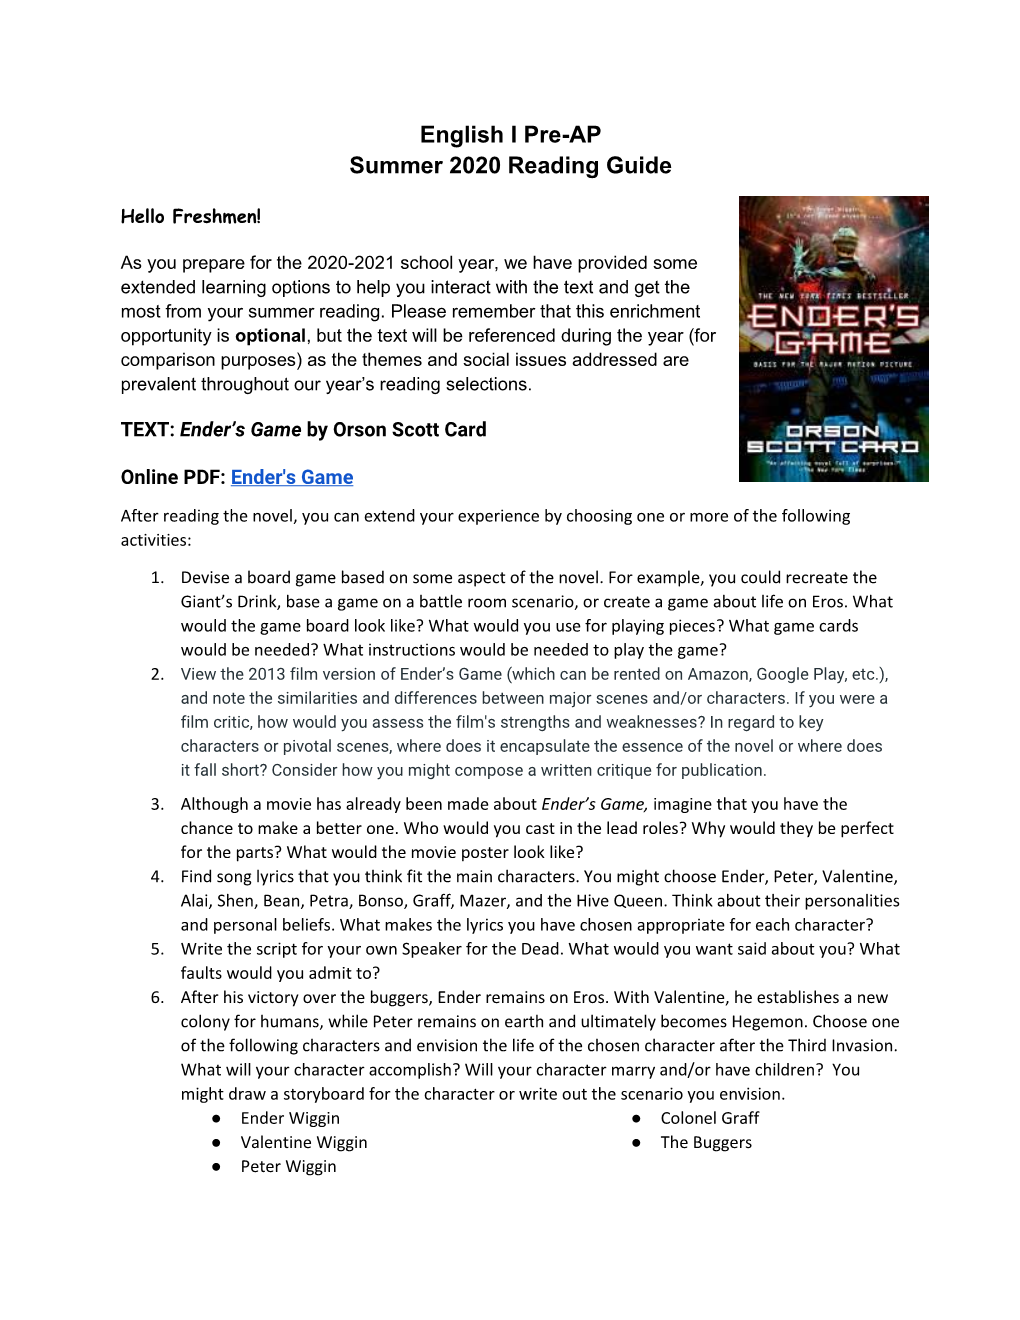 English I Pre-AP Summer 2020 Reading Guide